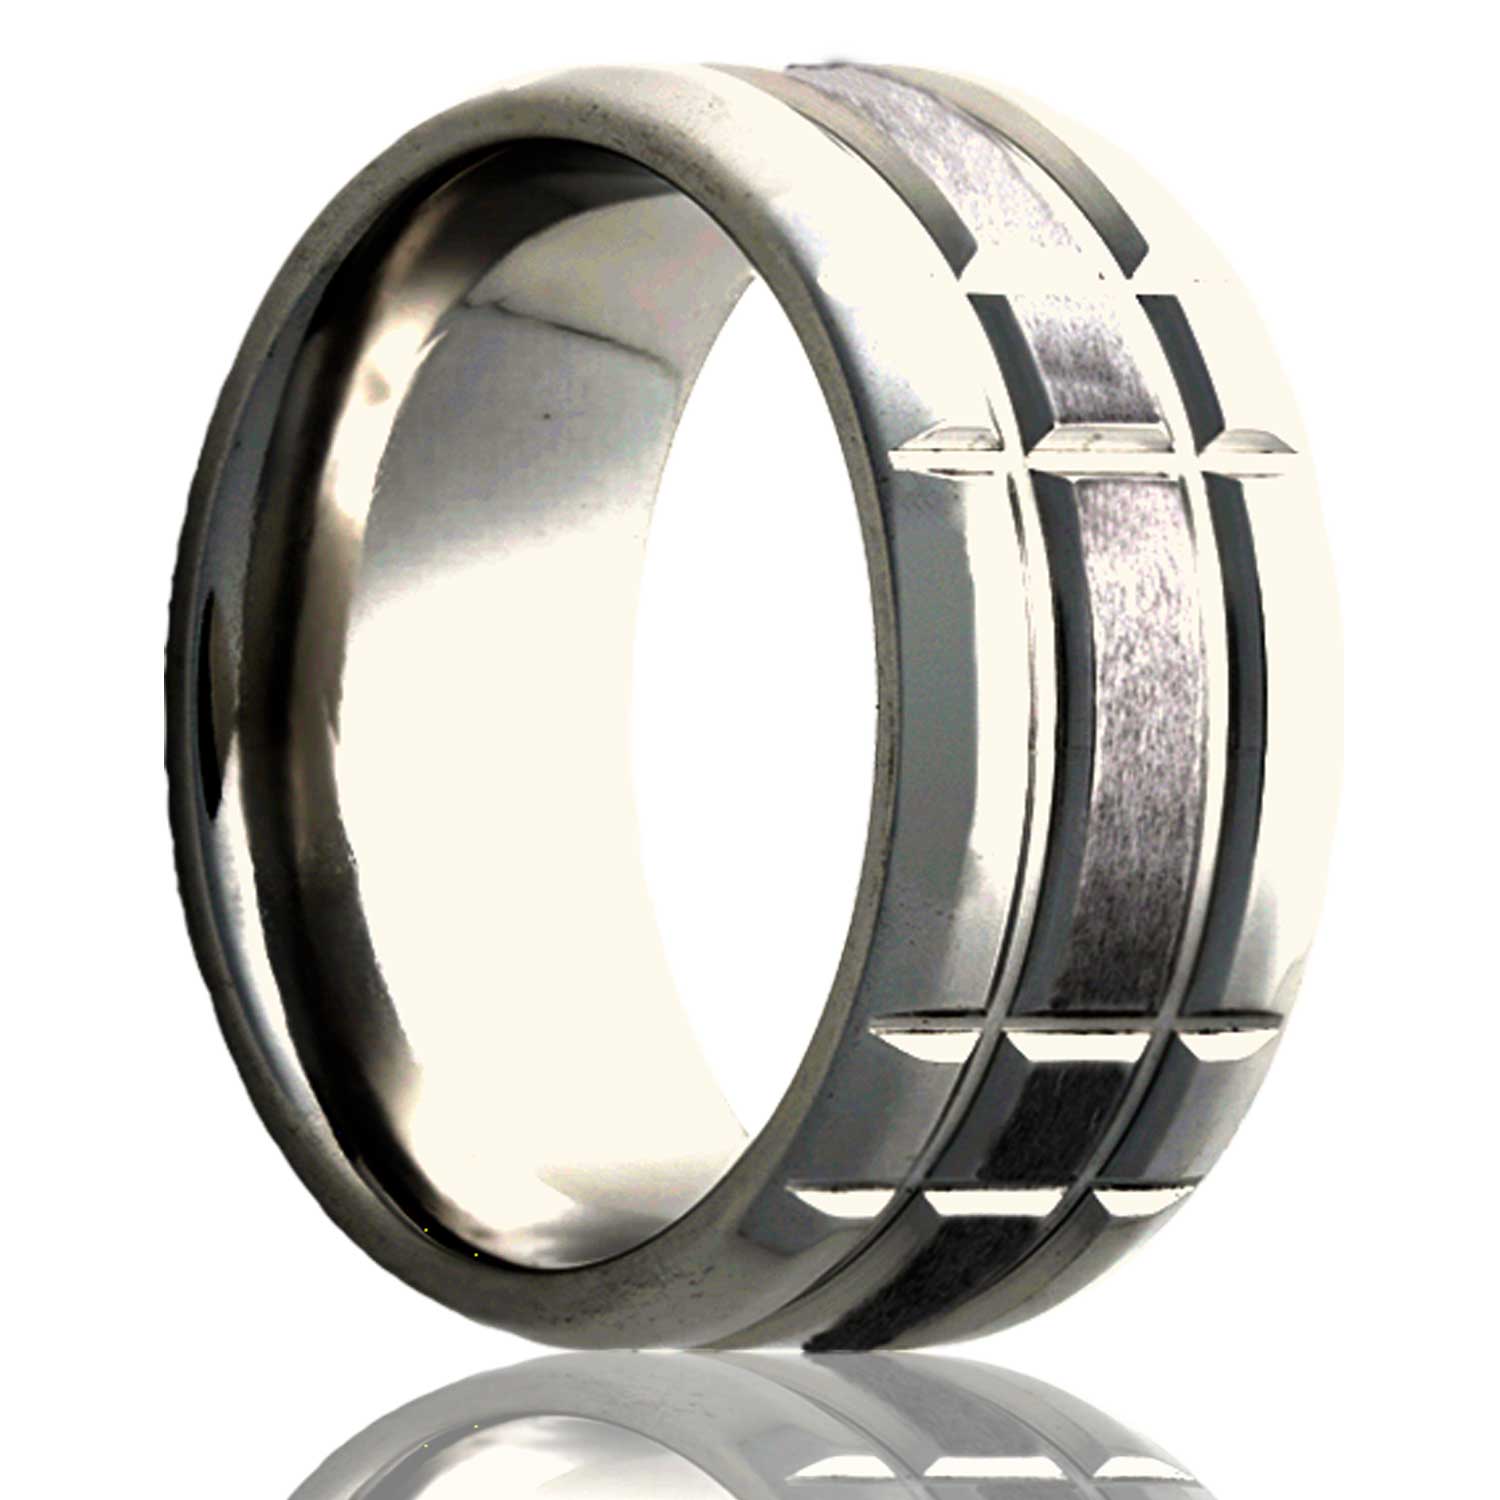 A intersecting grooves satin finish cobalt wedding band with beveled edges displayed on a neutral white background.